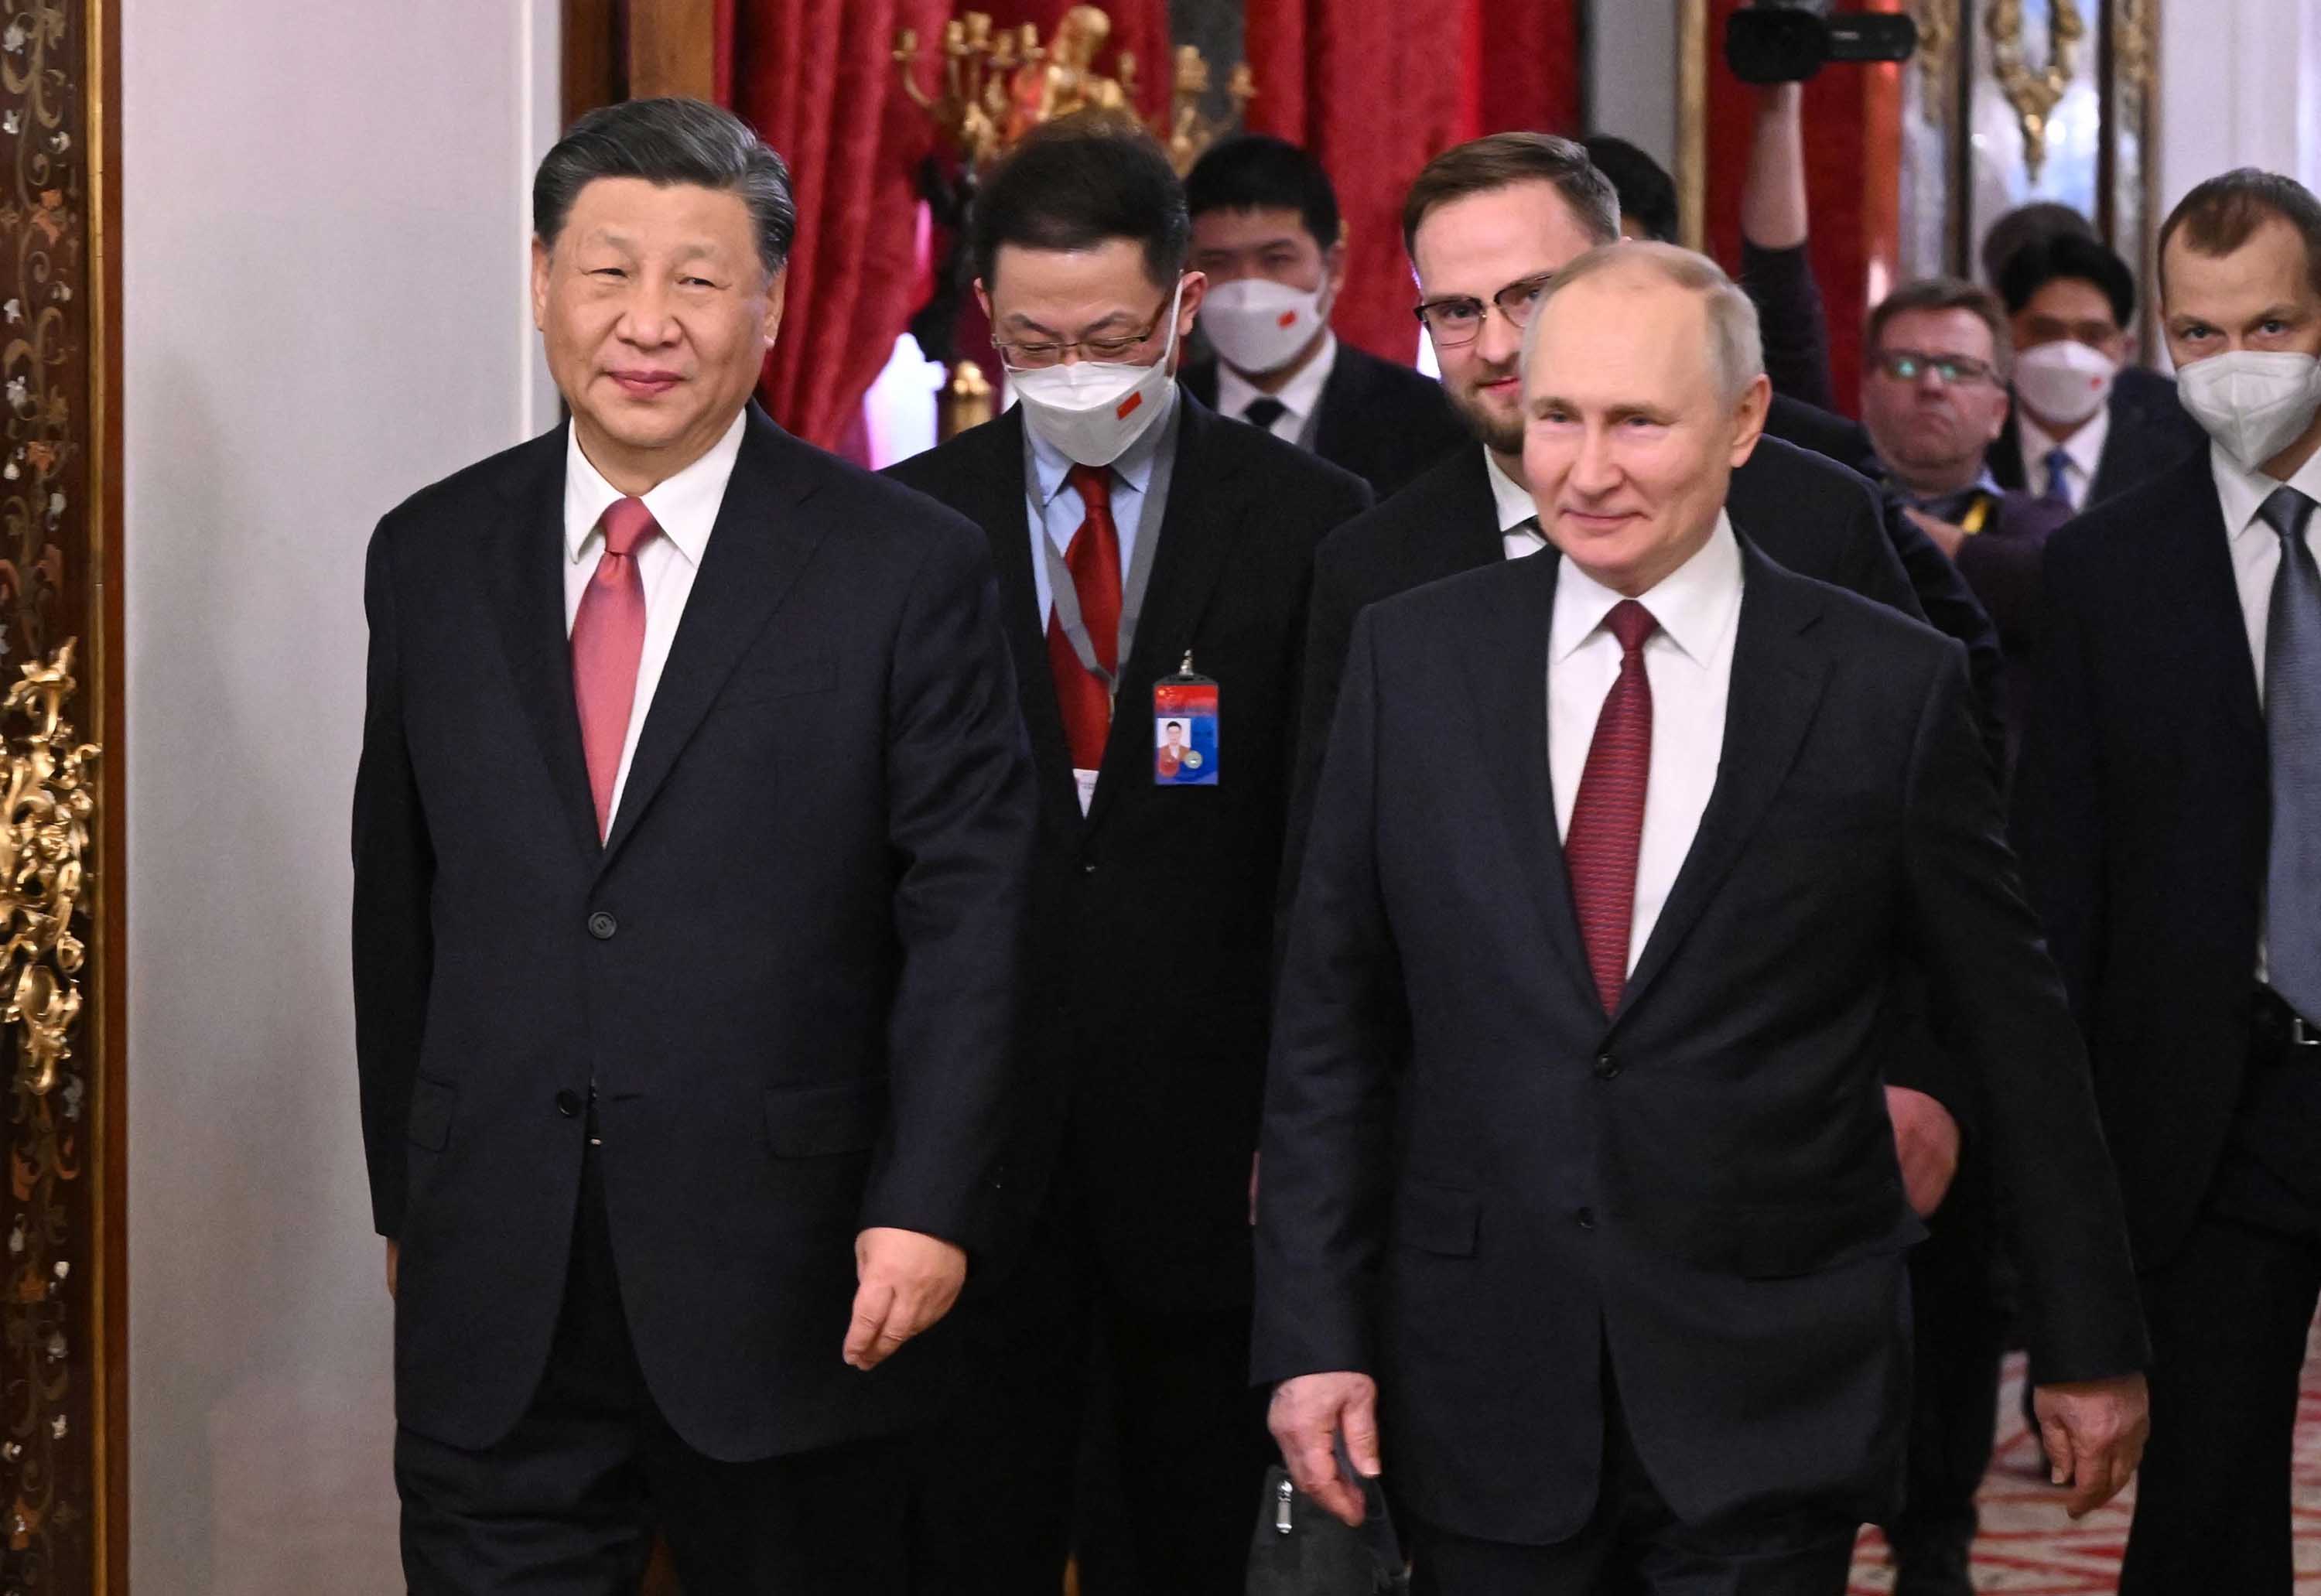 China's President Xi Jinping meets with Russian President Vladimir Putin at the Kremlin in Moscow, on Tuesday, March 21.